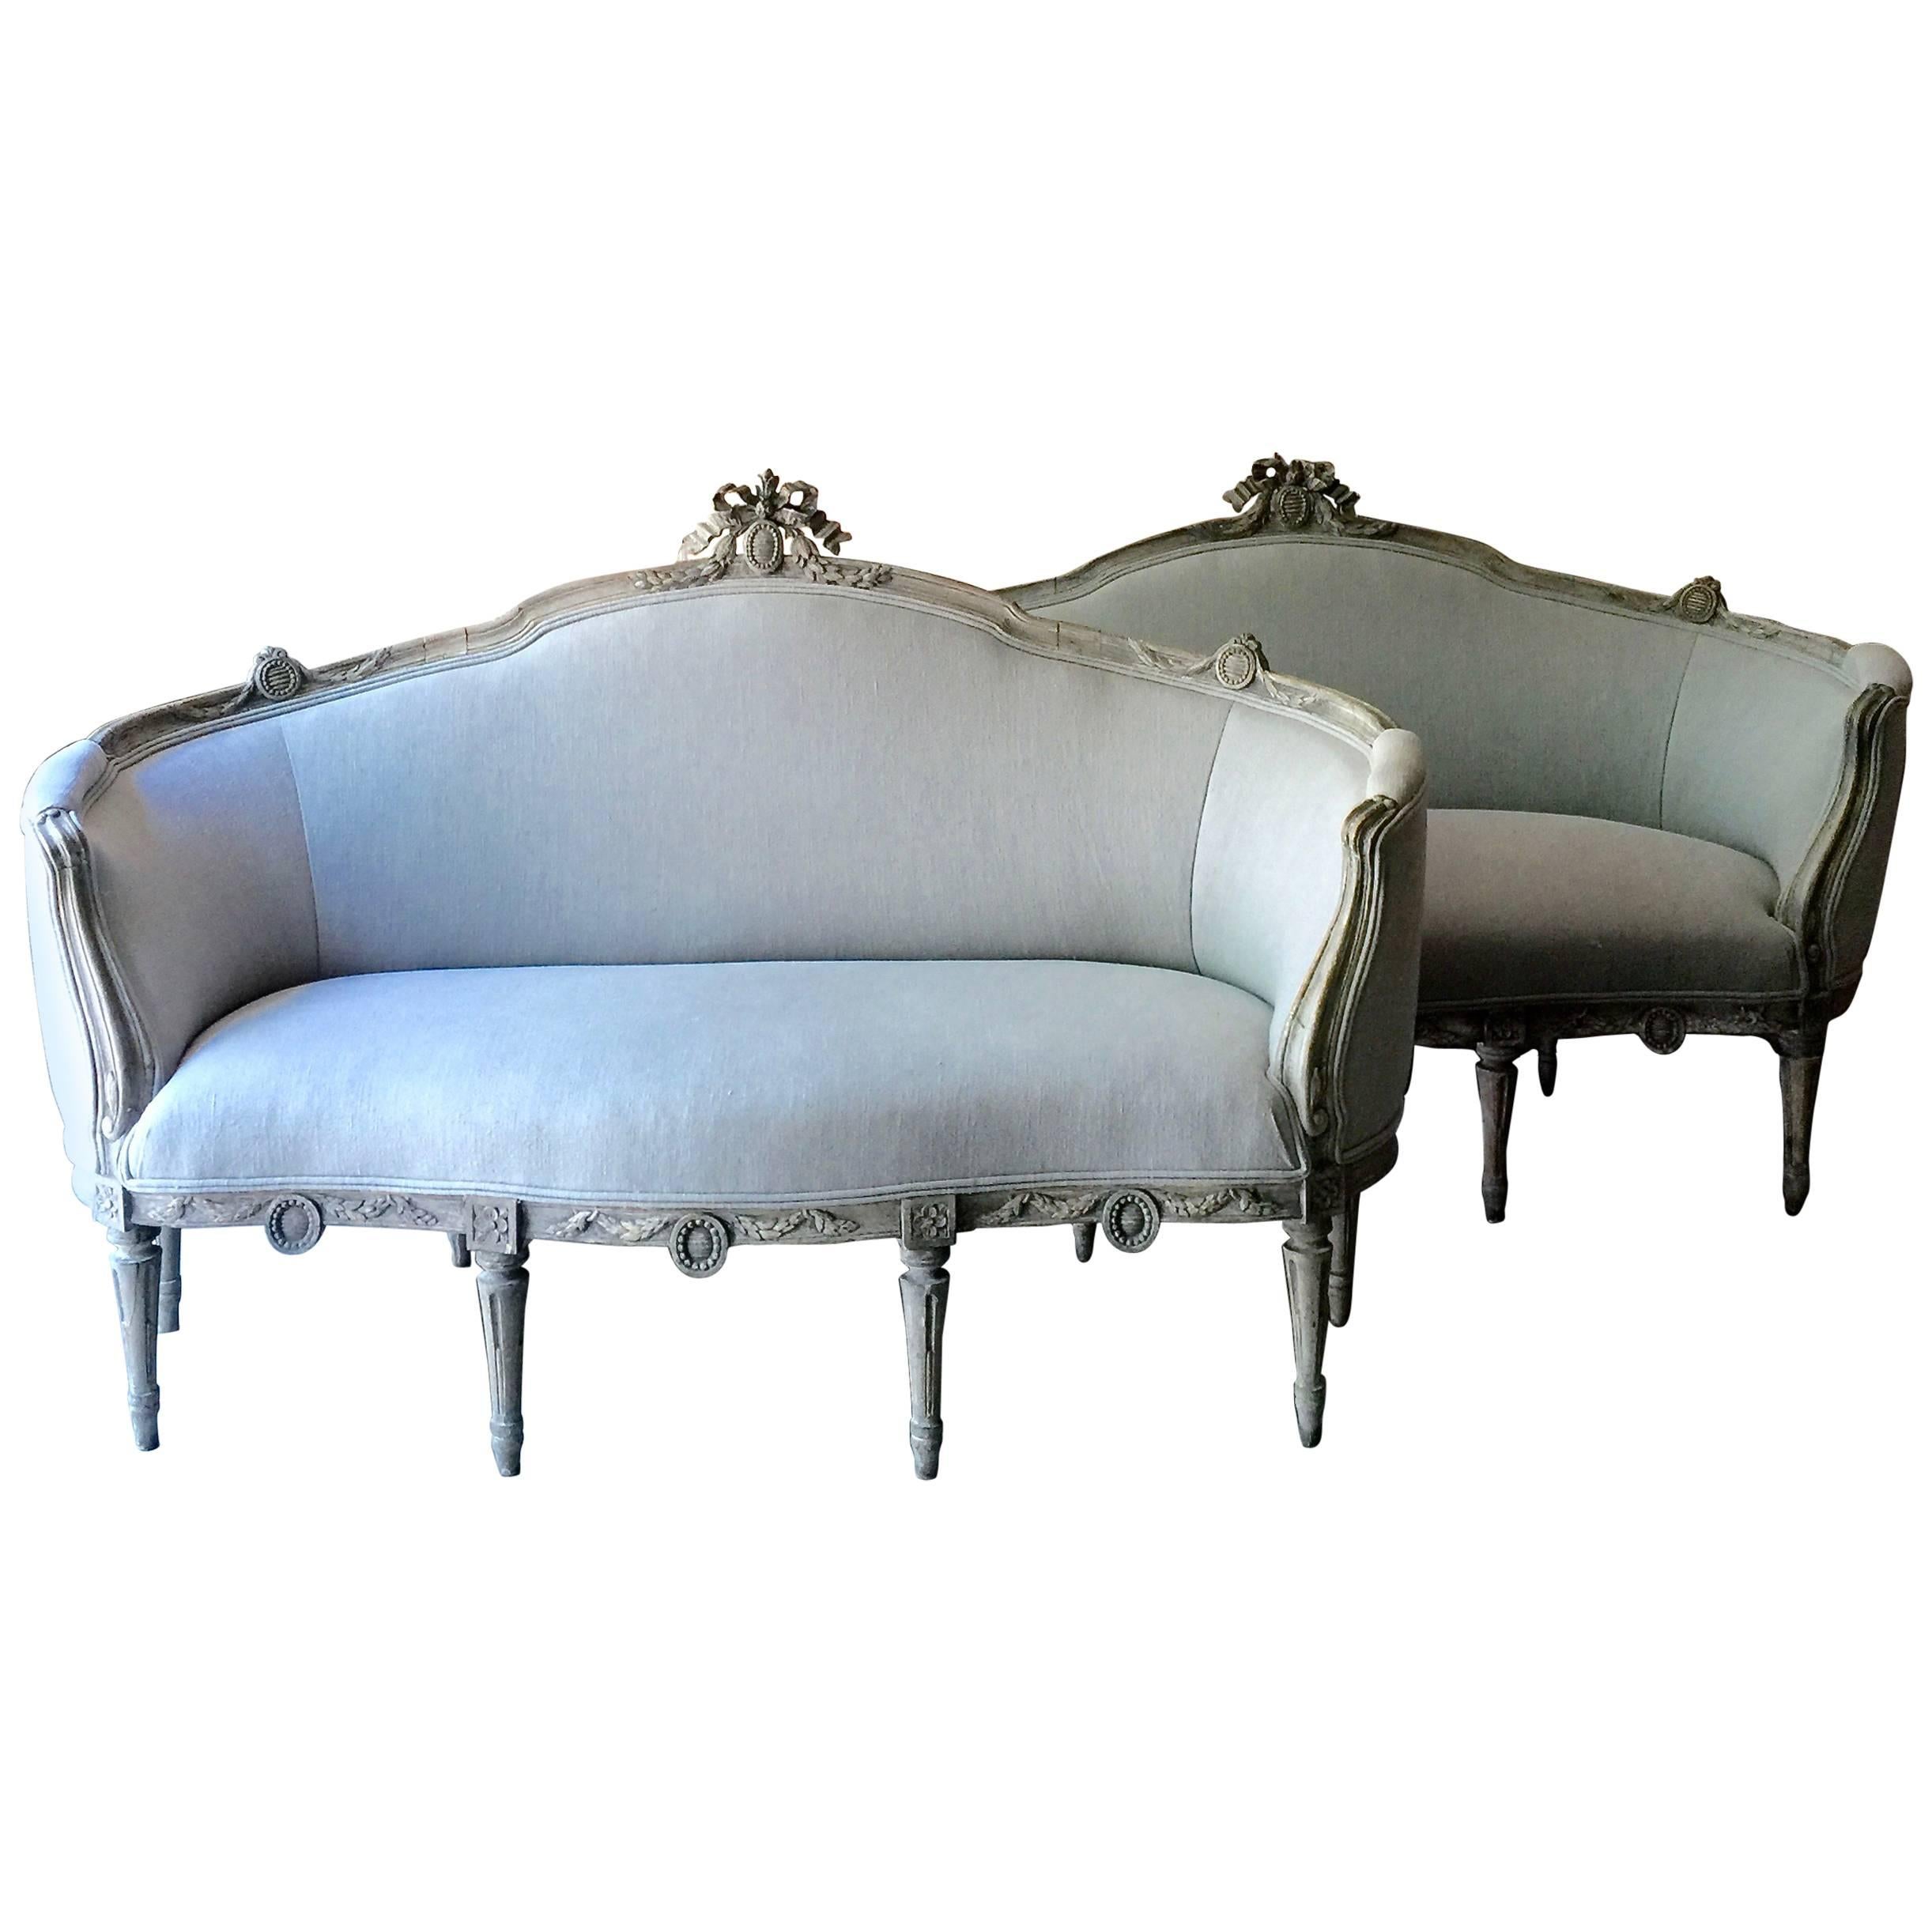 Pair of Decoratively Carved Swedish Gustavian Style Sofas